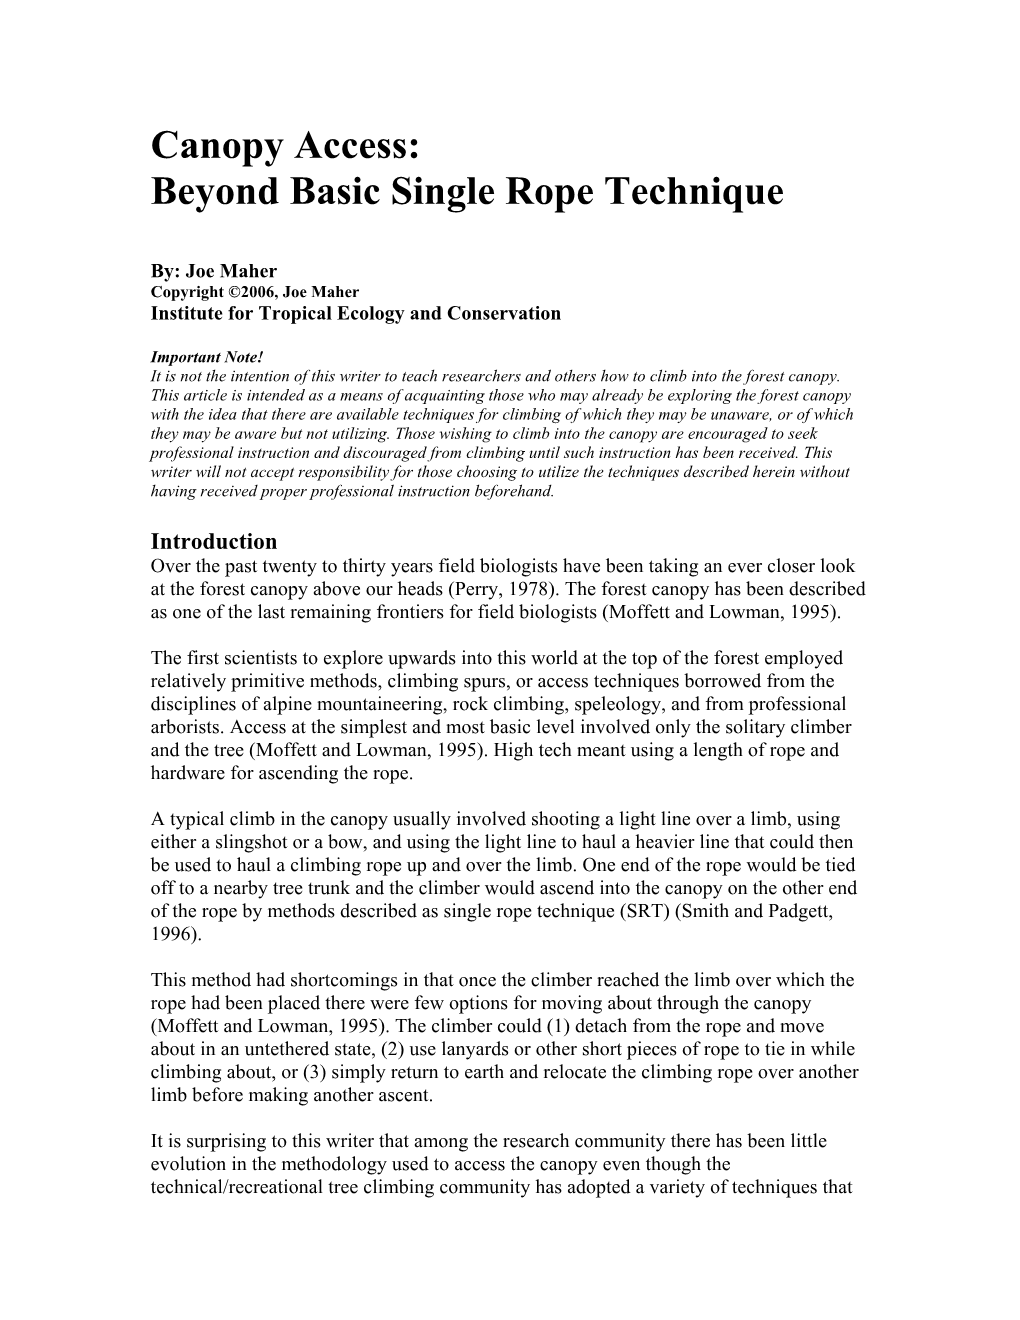 Canopy Access: Beyond Basic Single Rope Technique